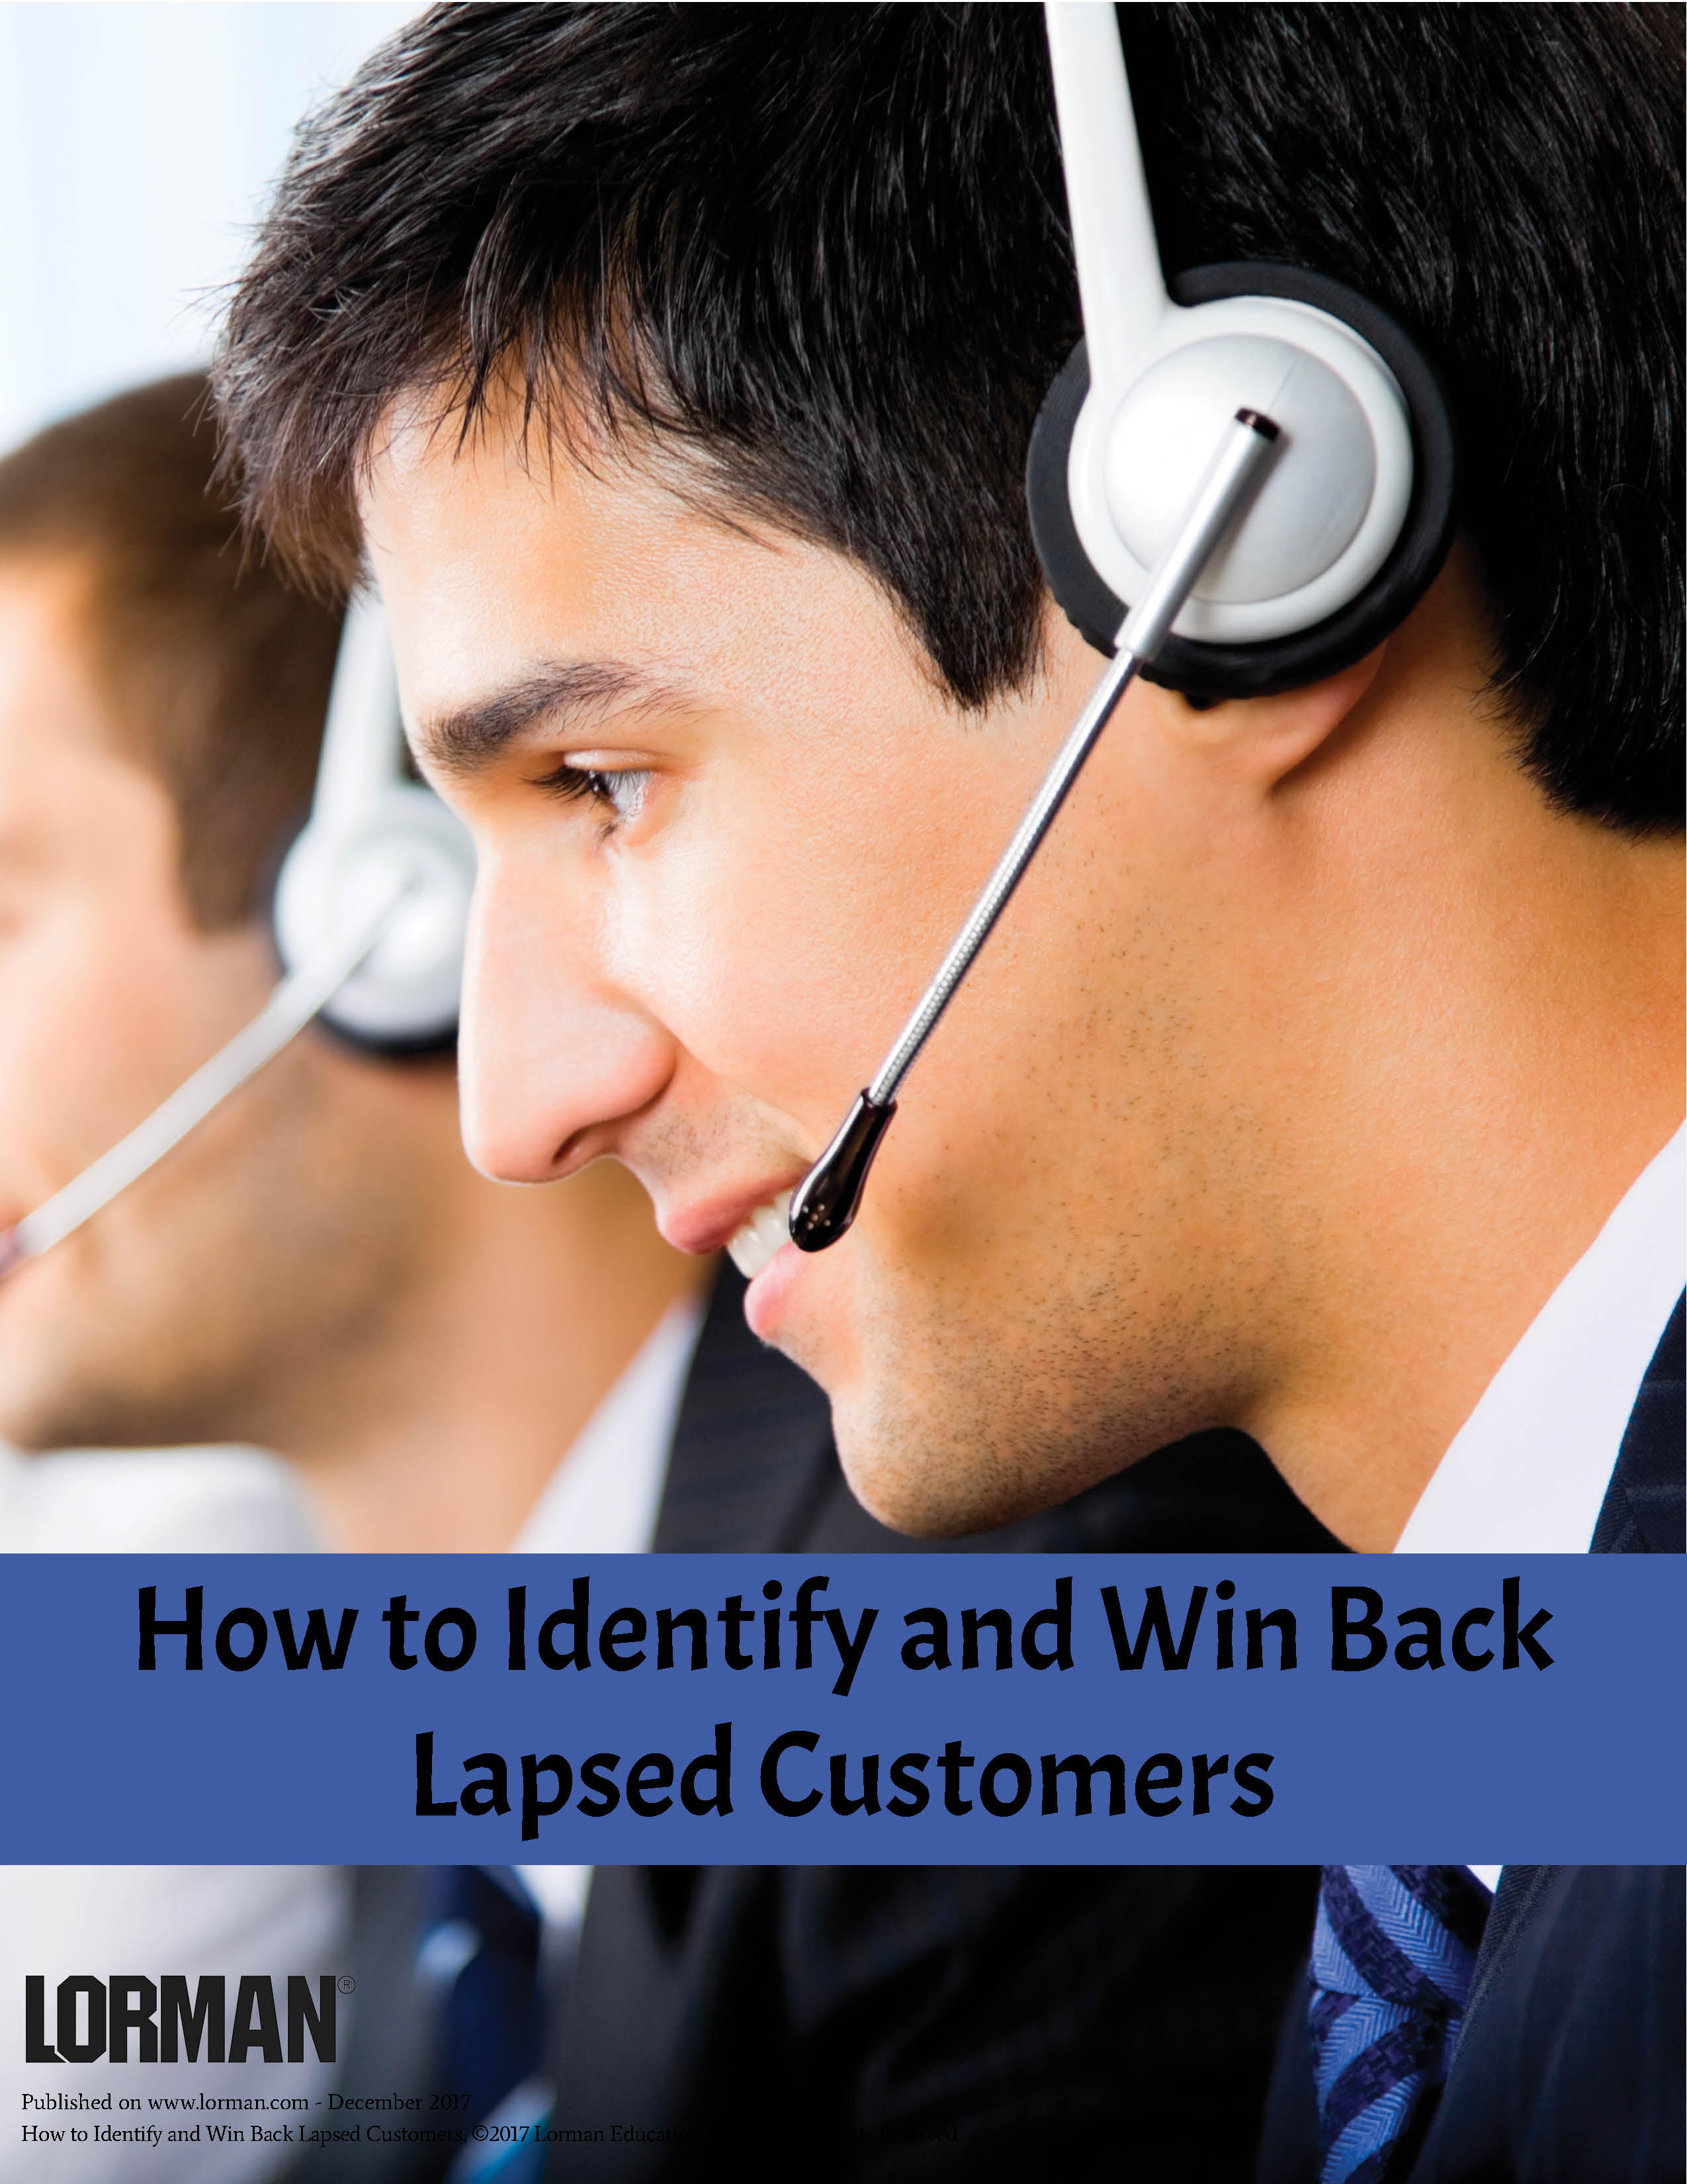 How to Identify and Win Back Lapsed Customers